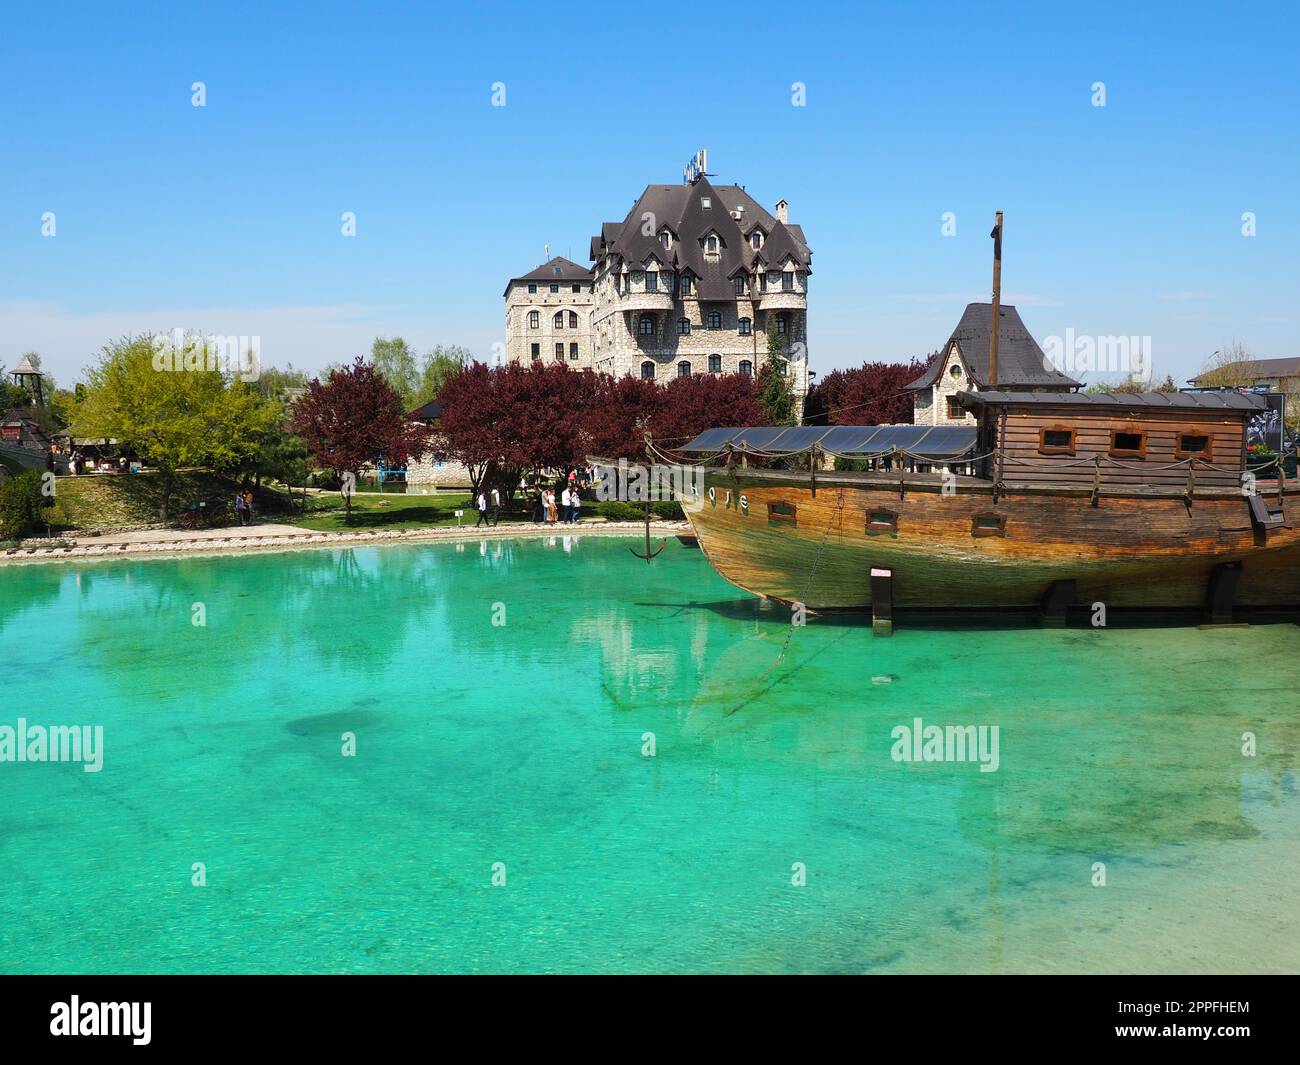 Stanisici, Bijelina, Bosnia and Herzegovina, April 25, 2021. A wooden ship with an anchor docking near the coast. Turquoise or blue water. People and tourists walk along the shore. Clear shallow water Stock Photo